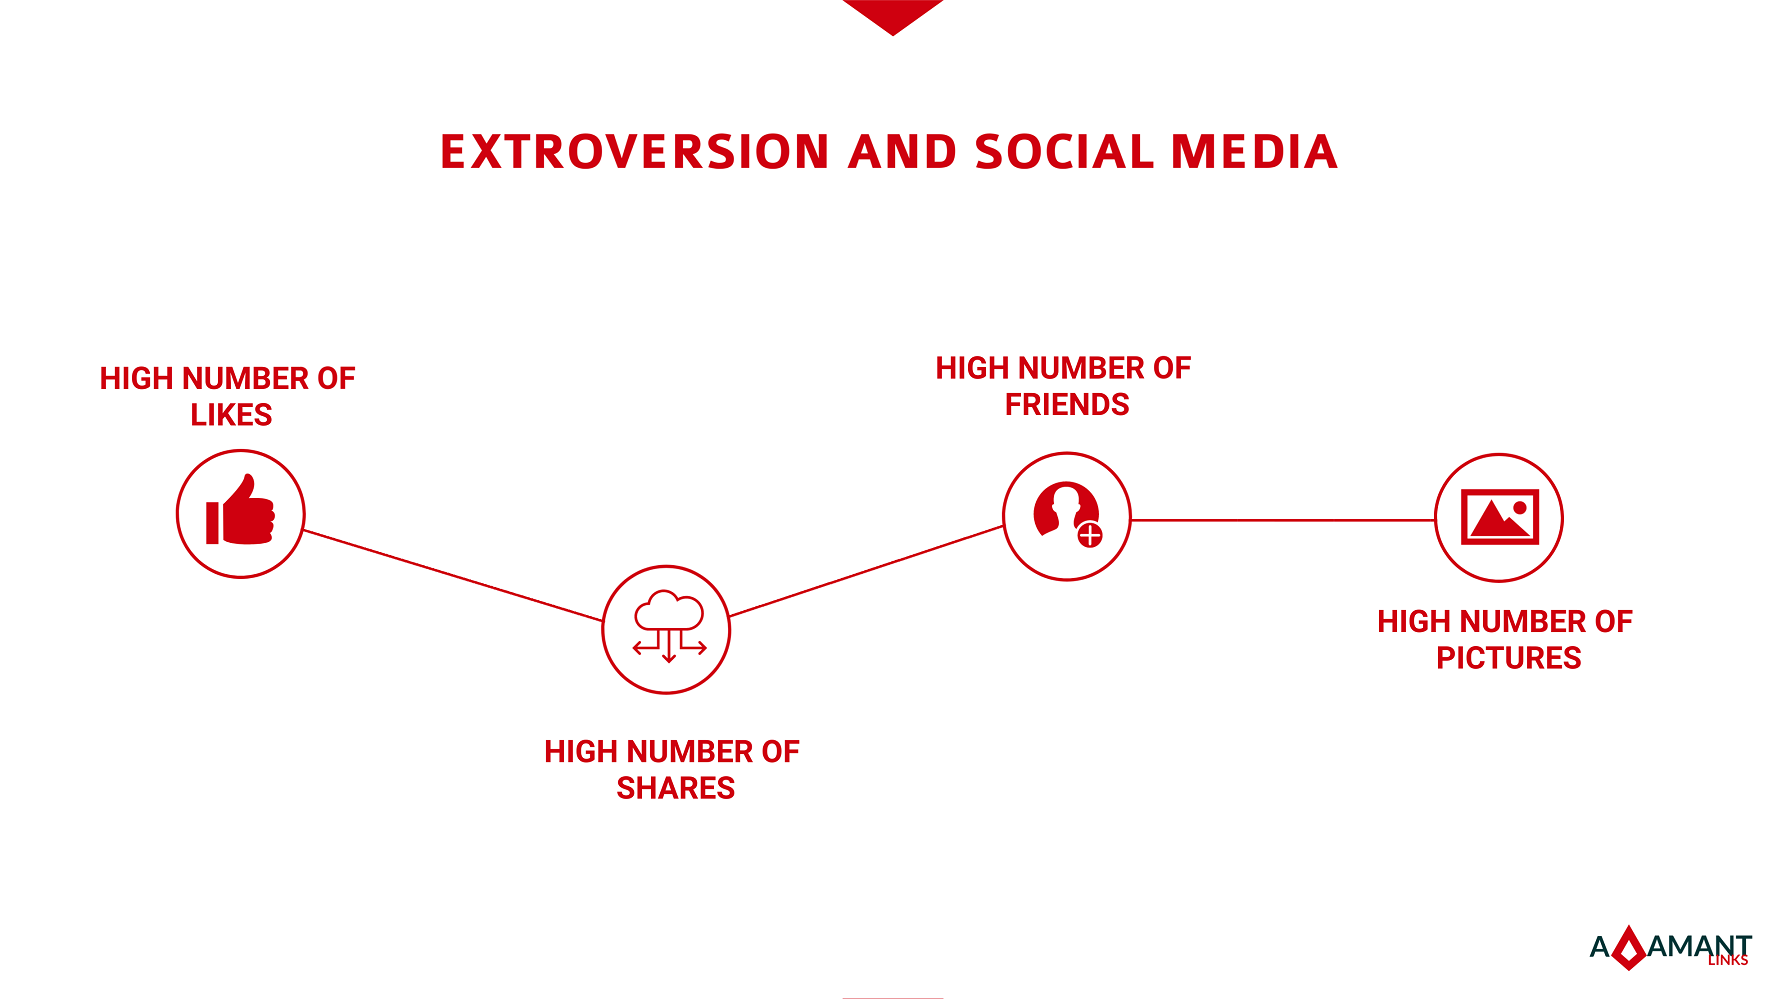 Adamant Links - Extroversion and Social Media